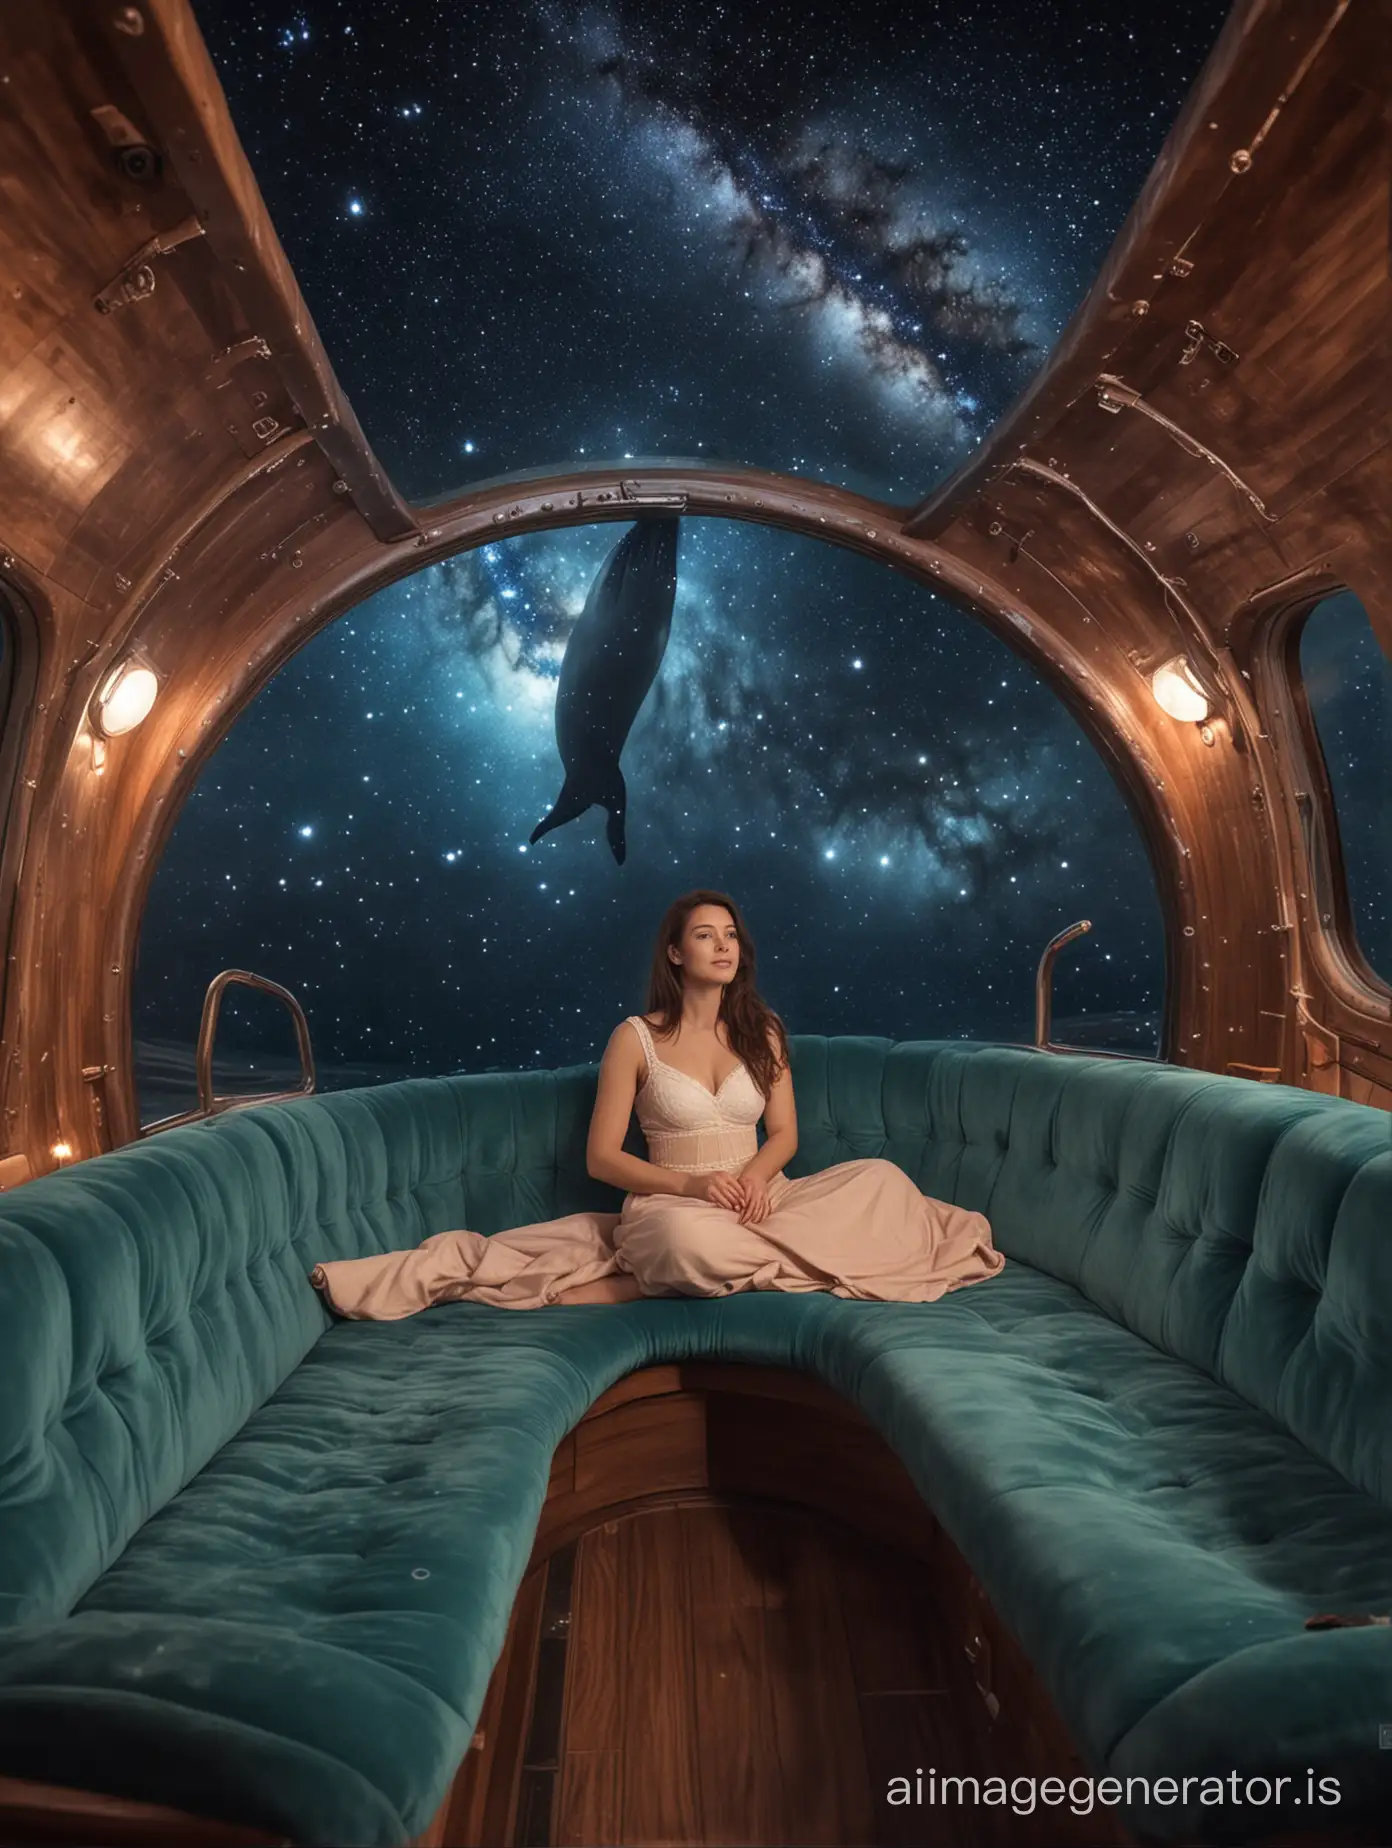 Astrophotography-Inside-Whale-Woman-Seated-on-Couch-HD